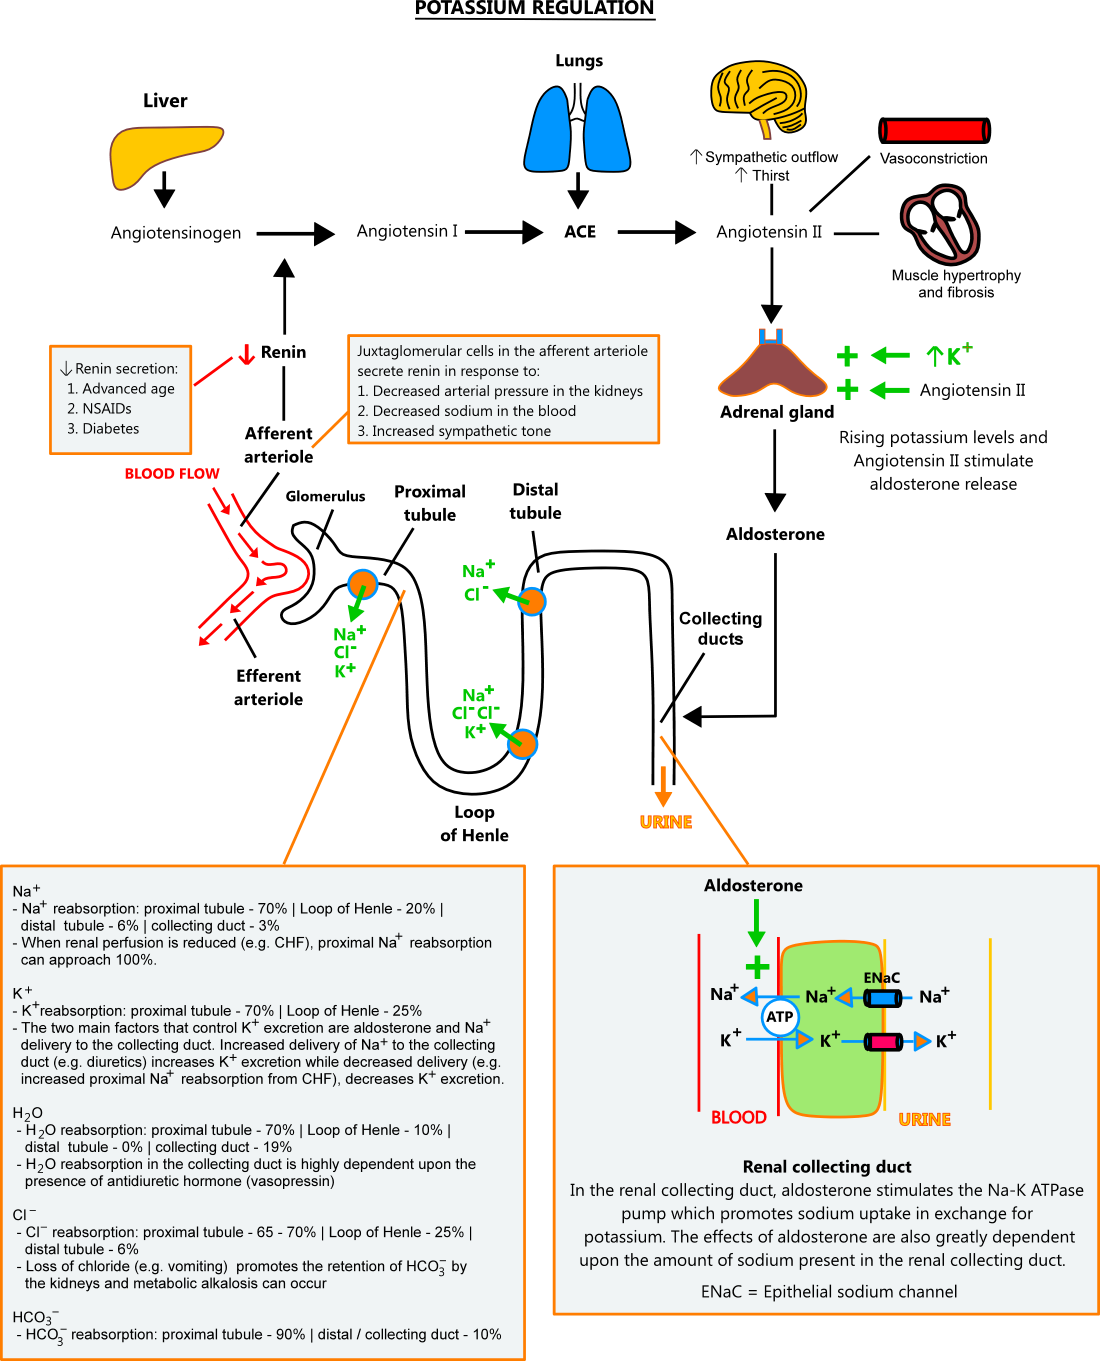 Illustration of the renin-angiotensin-aldosterone system and its role in regulating potassium